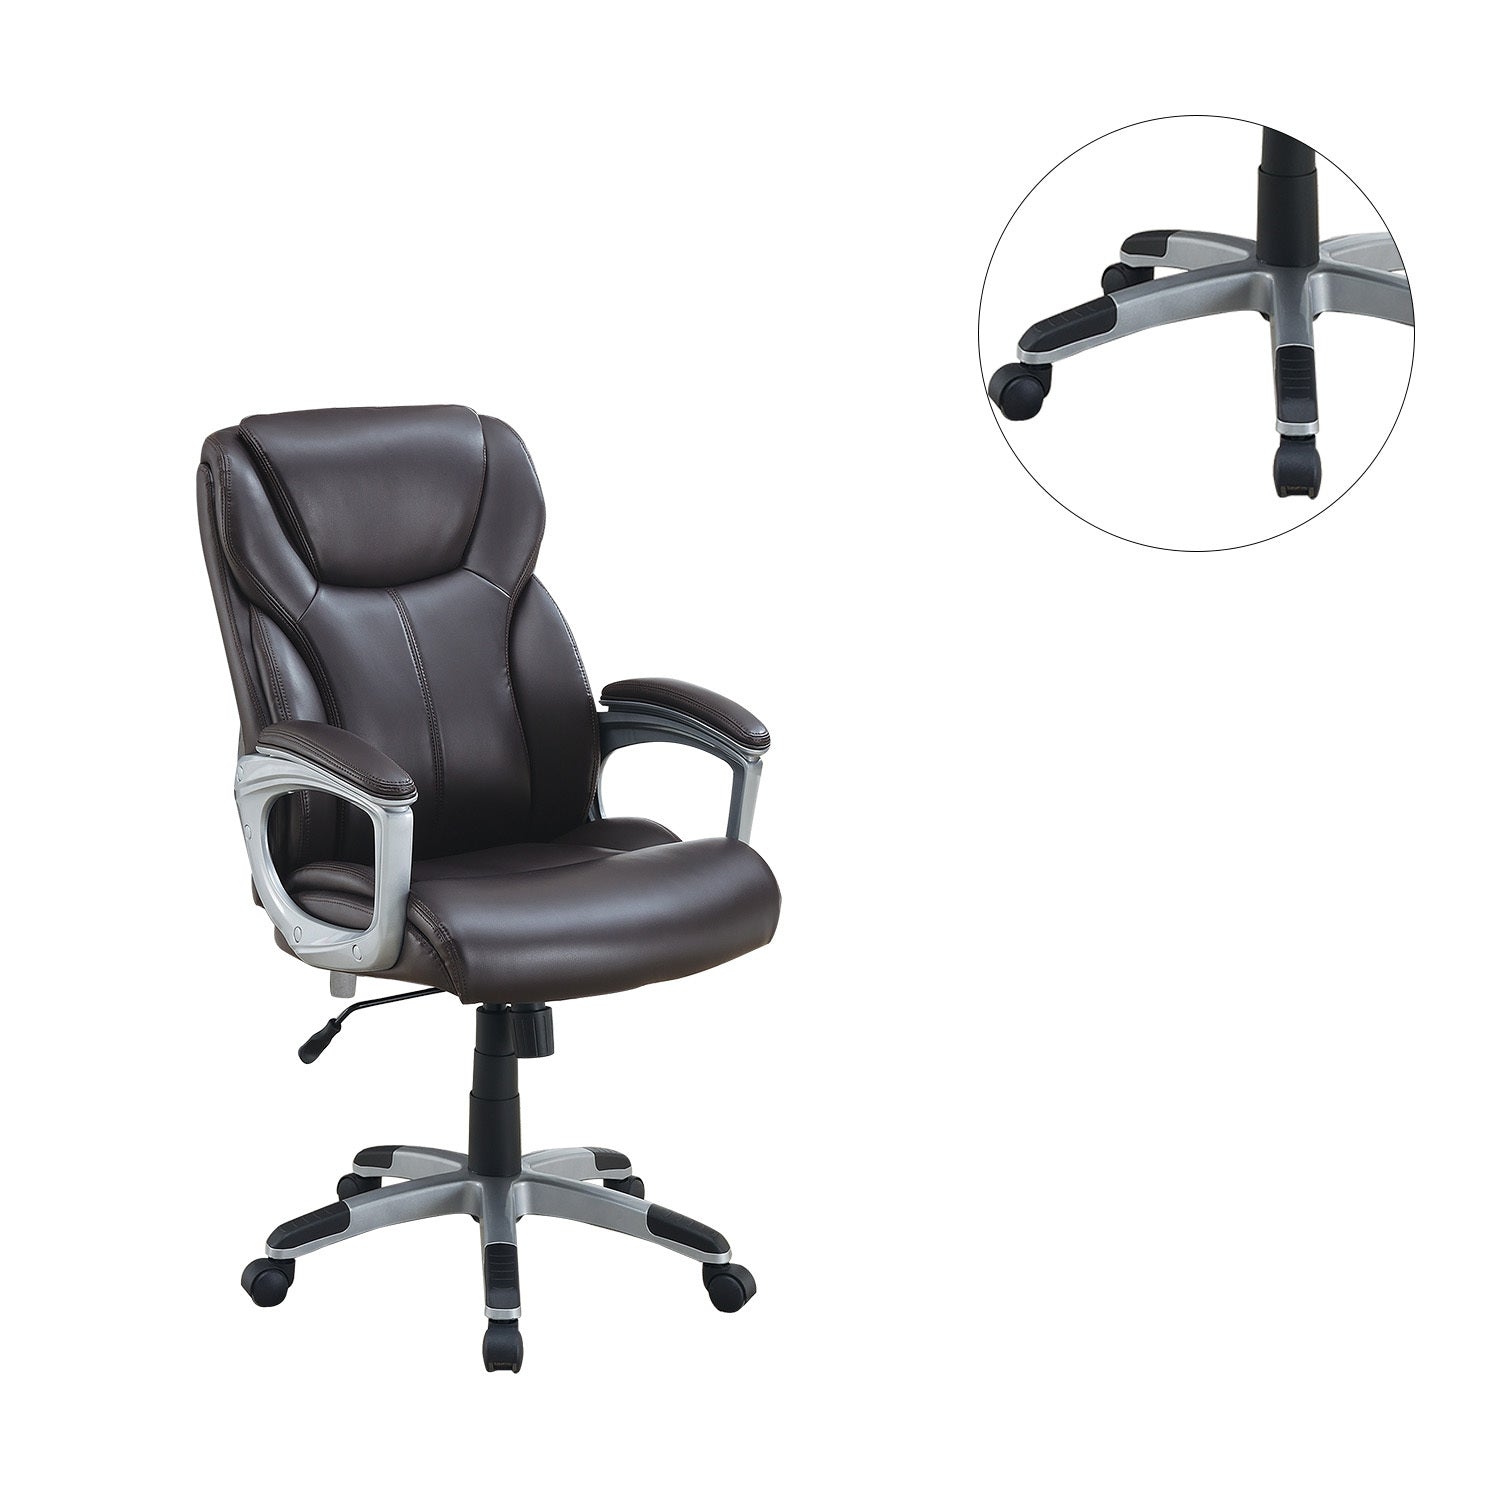 Adjustable Height Office Chair with PU Leather (Brown)